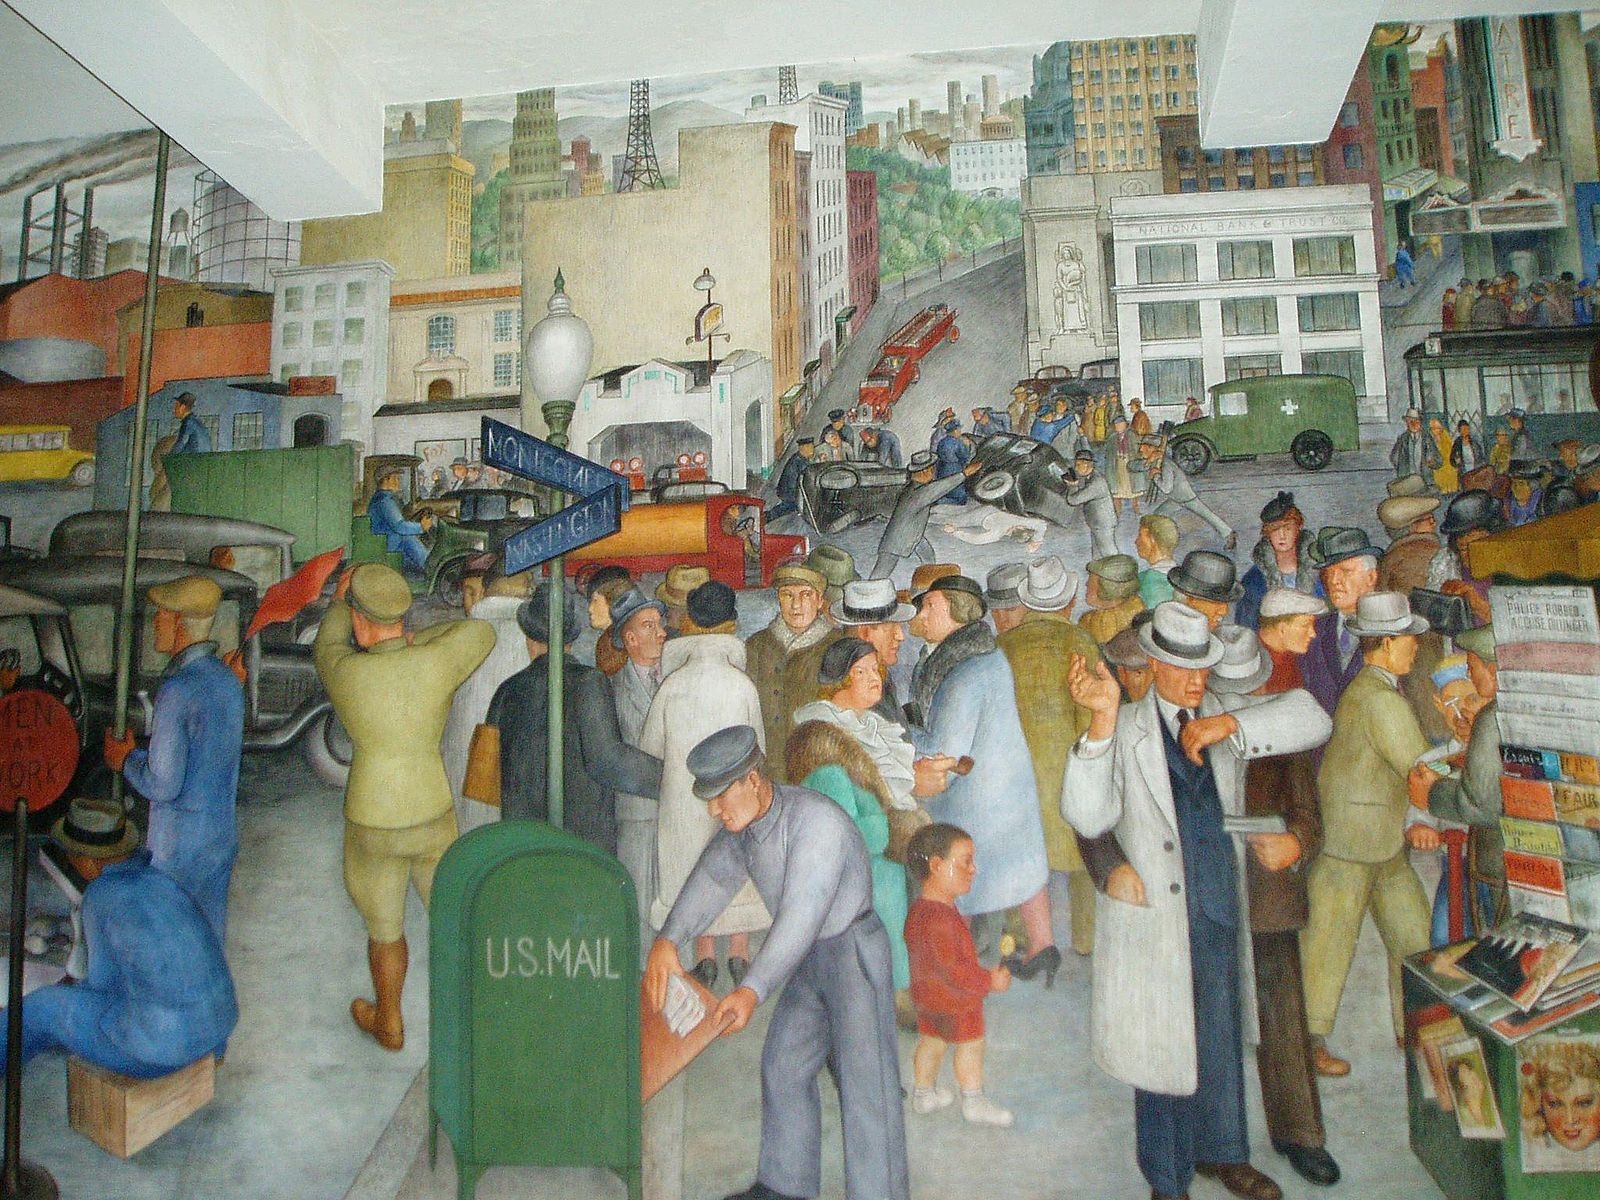 Mural of city streets in San Francisco with several people buying food, goods and picking up mail